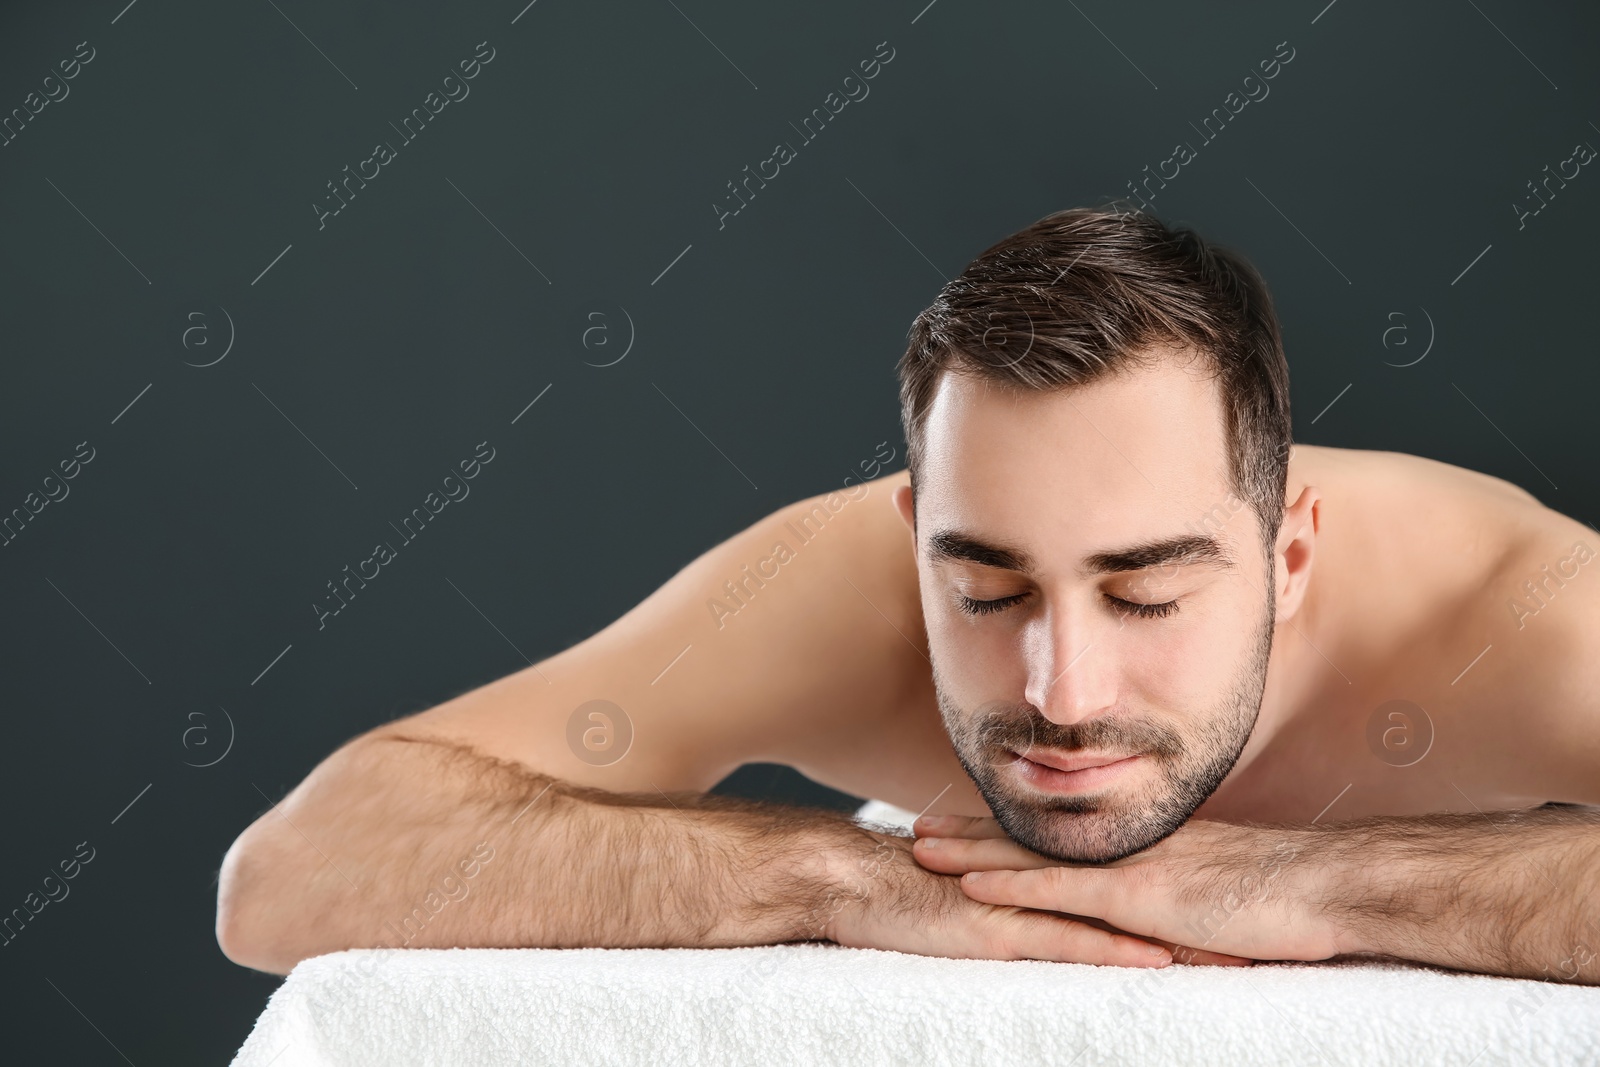 Photo of Handsome man relaxing on massage table against black background, space for text. Spa service